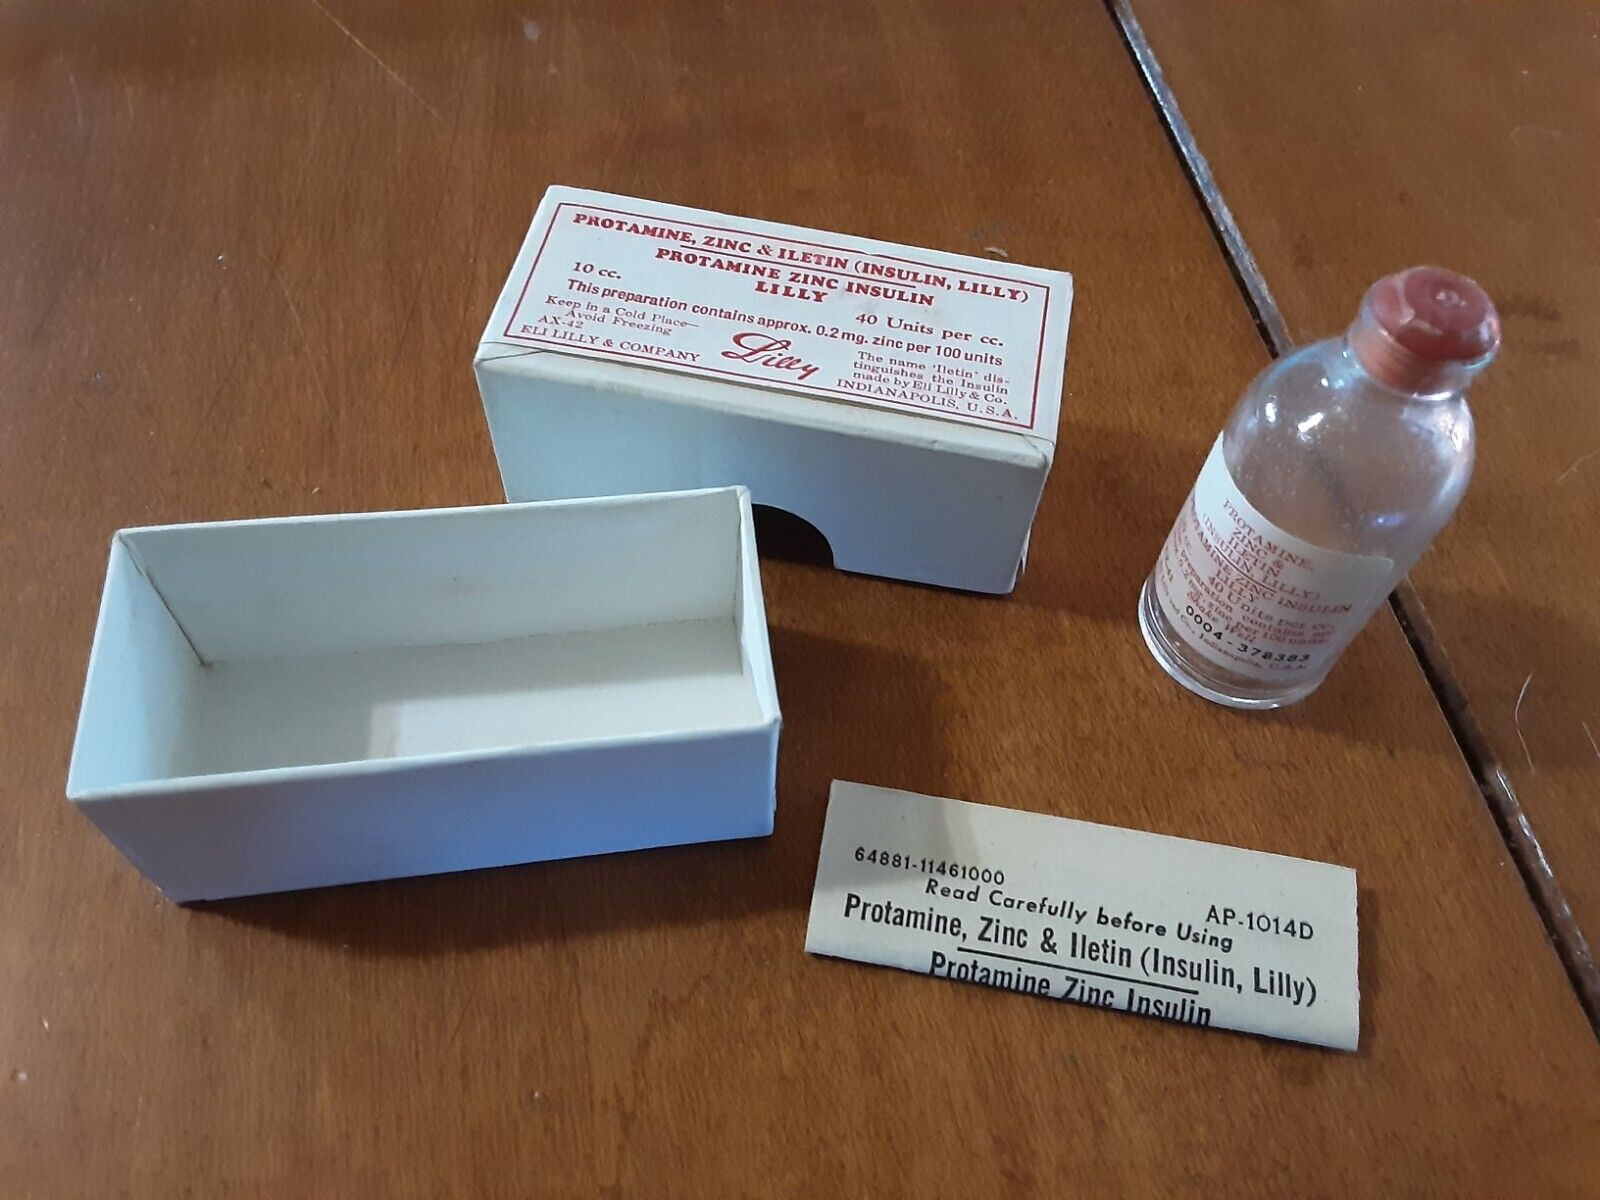 1946 LILLY 10 CC PROTAMINE ZINC INSULIN BOTTLE (EMPTY) WITH BOX INSTRUCTIONS